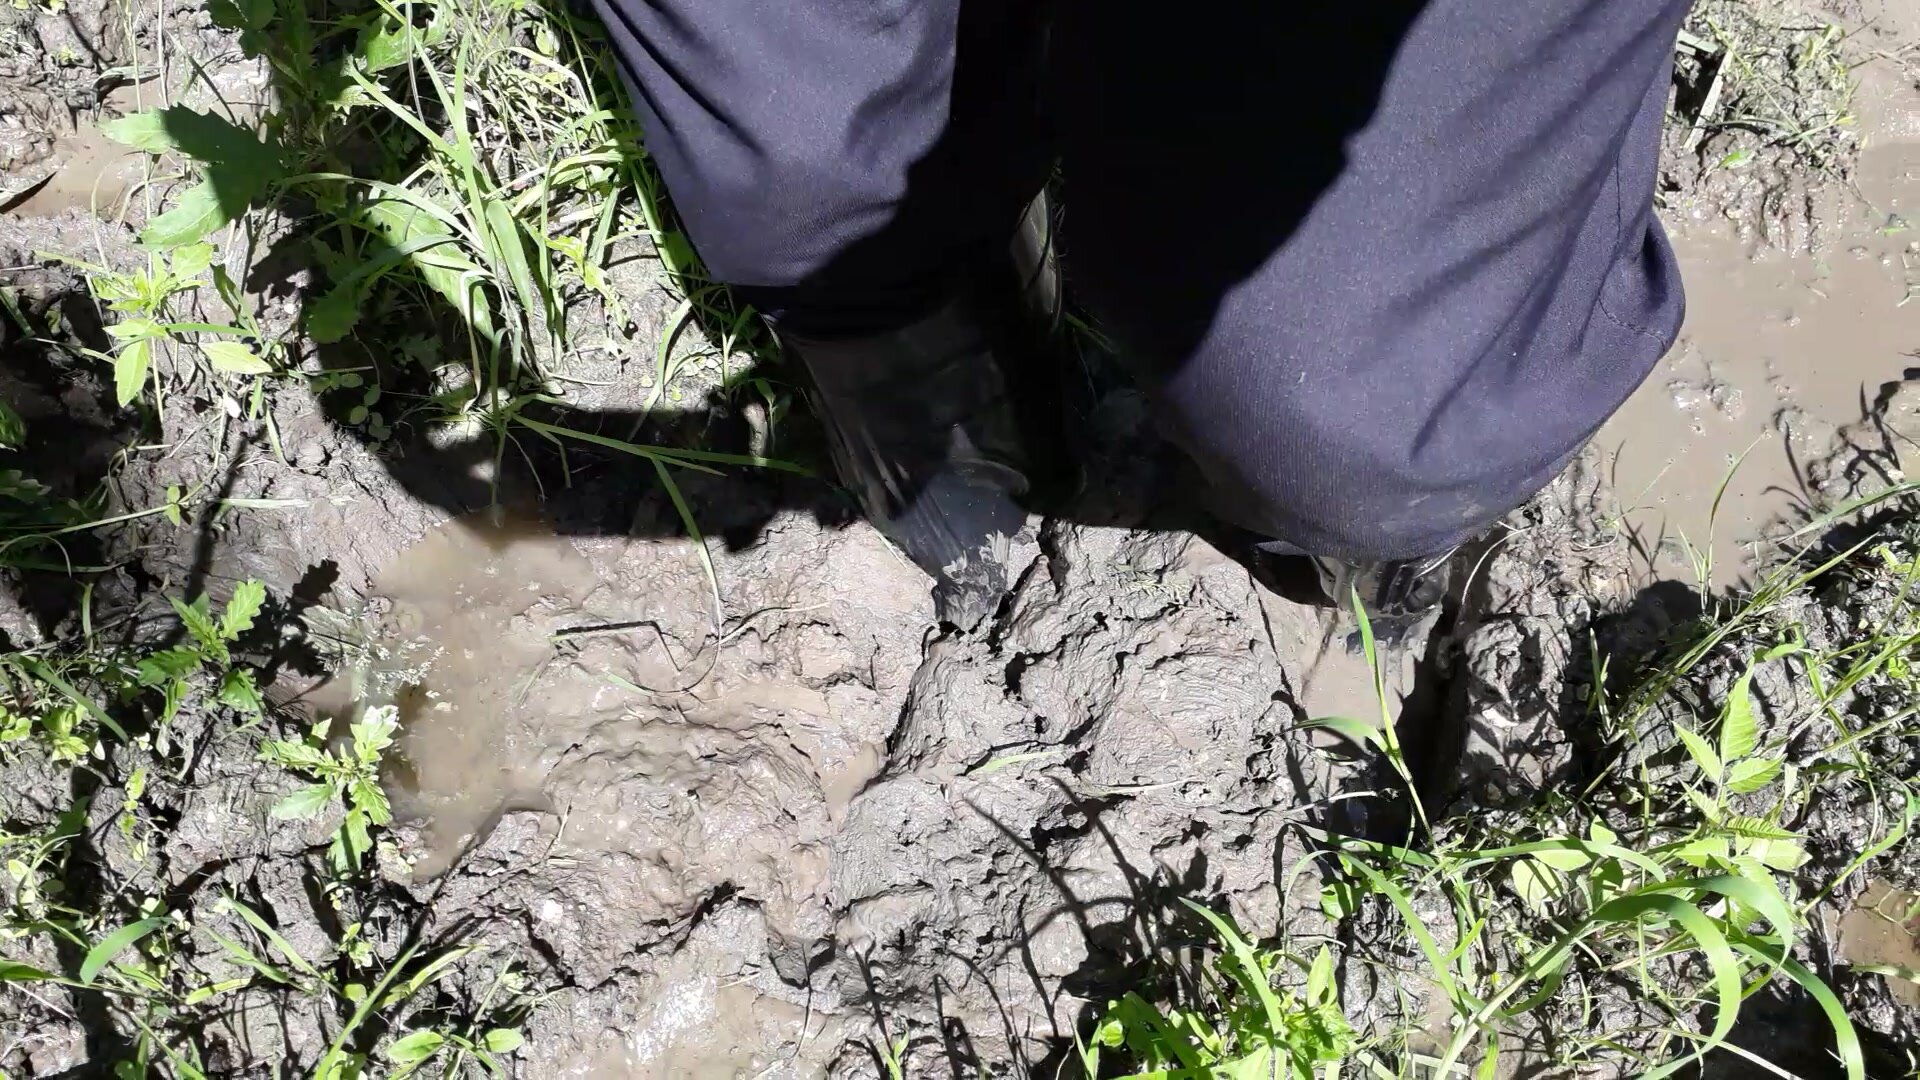 Rubber boots in mud - video 5